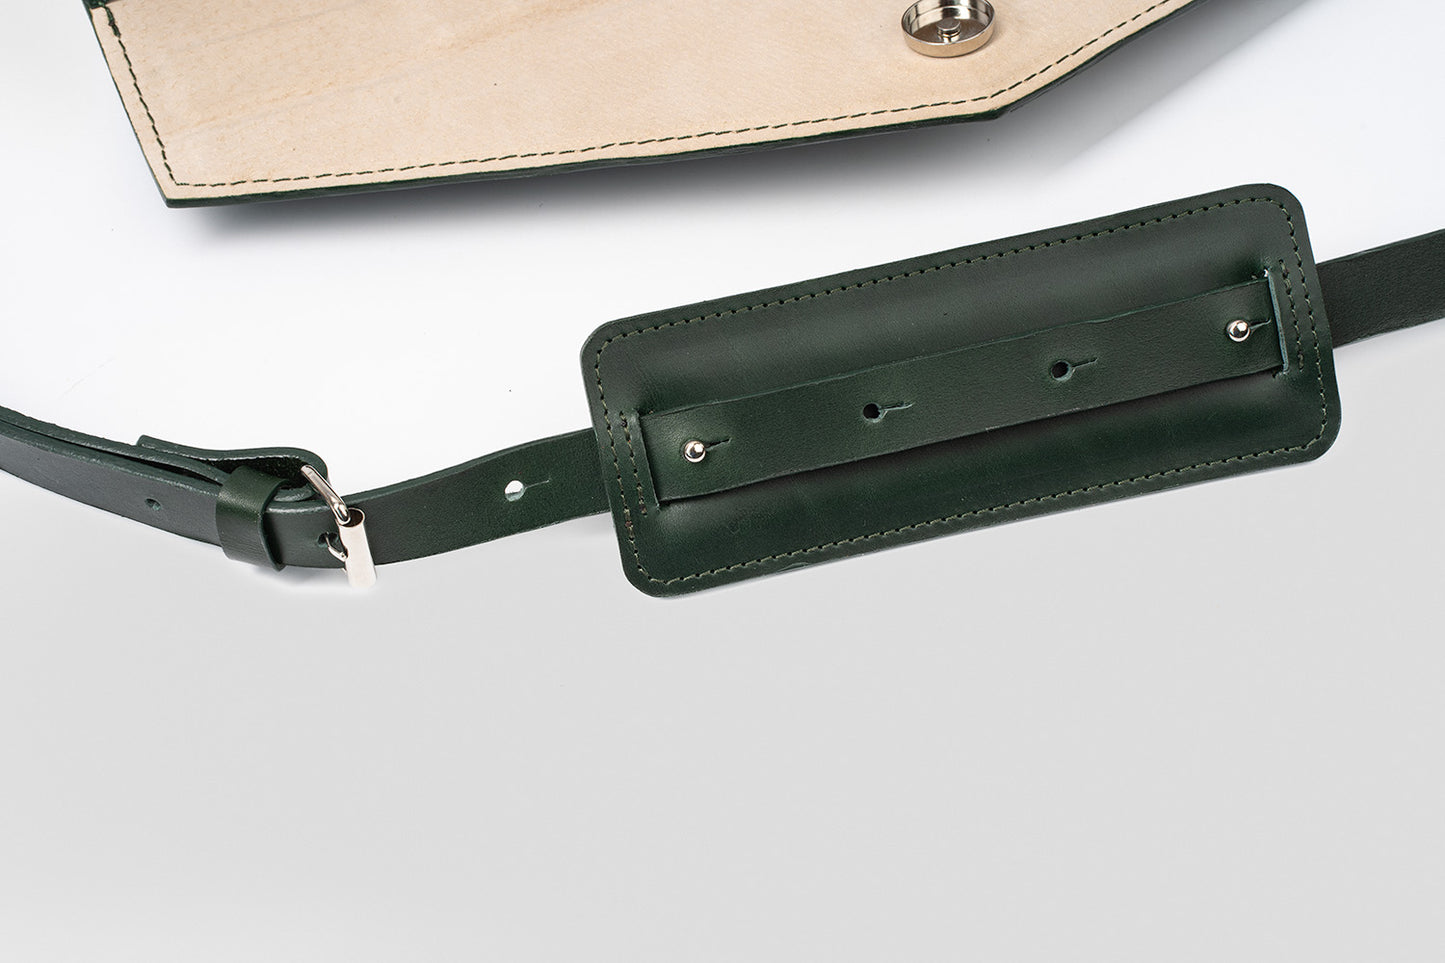 Adjustable crossbody strap on a green leather ladies briefcase, featuring a comfortable shoulder pad and secure clasps, perfect for daily professional use.